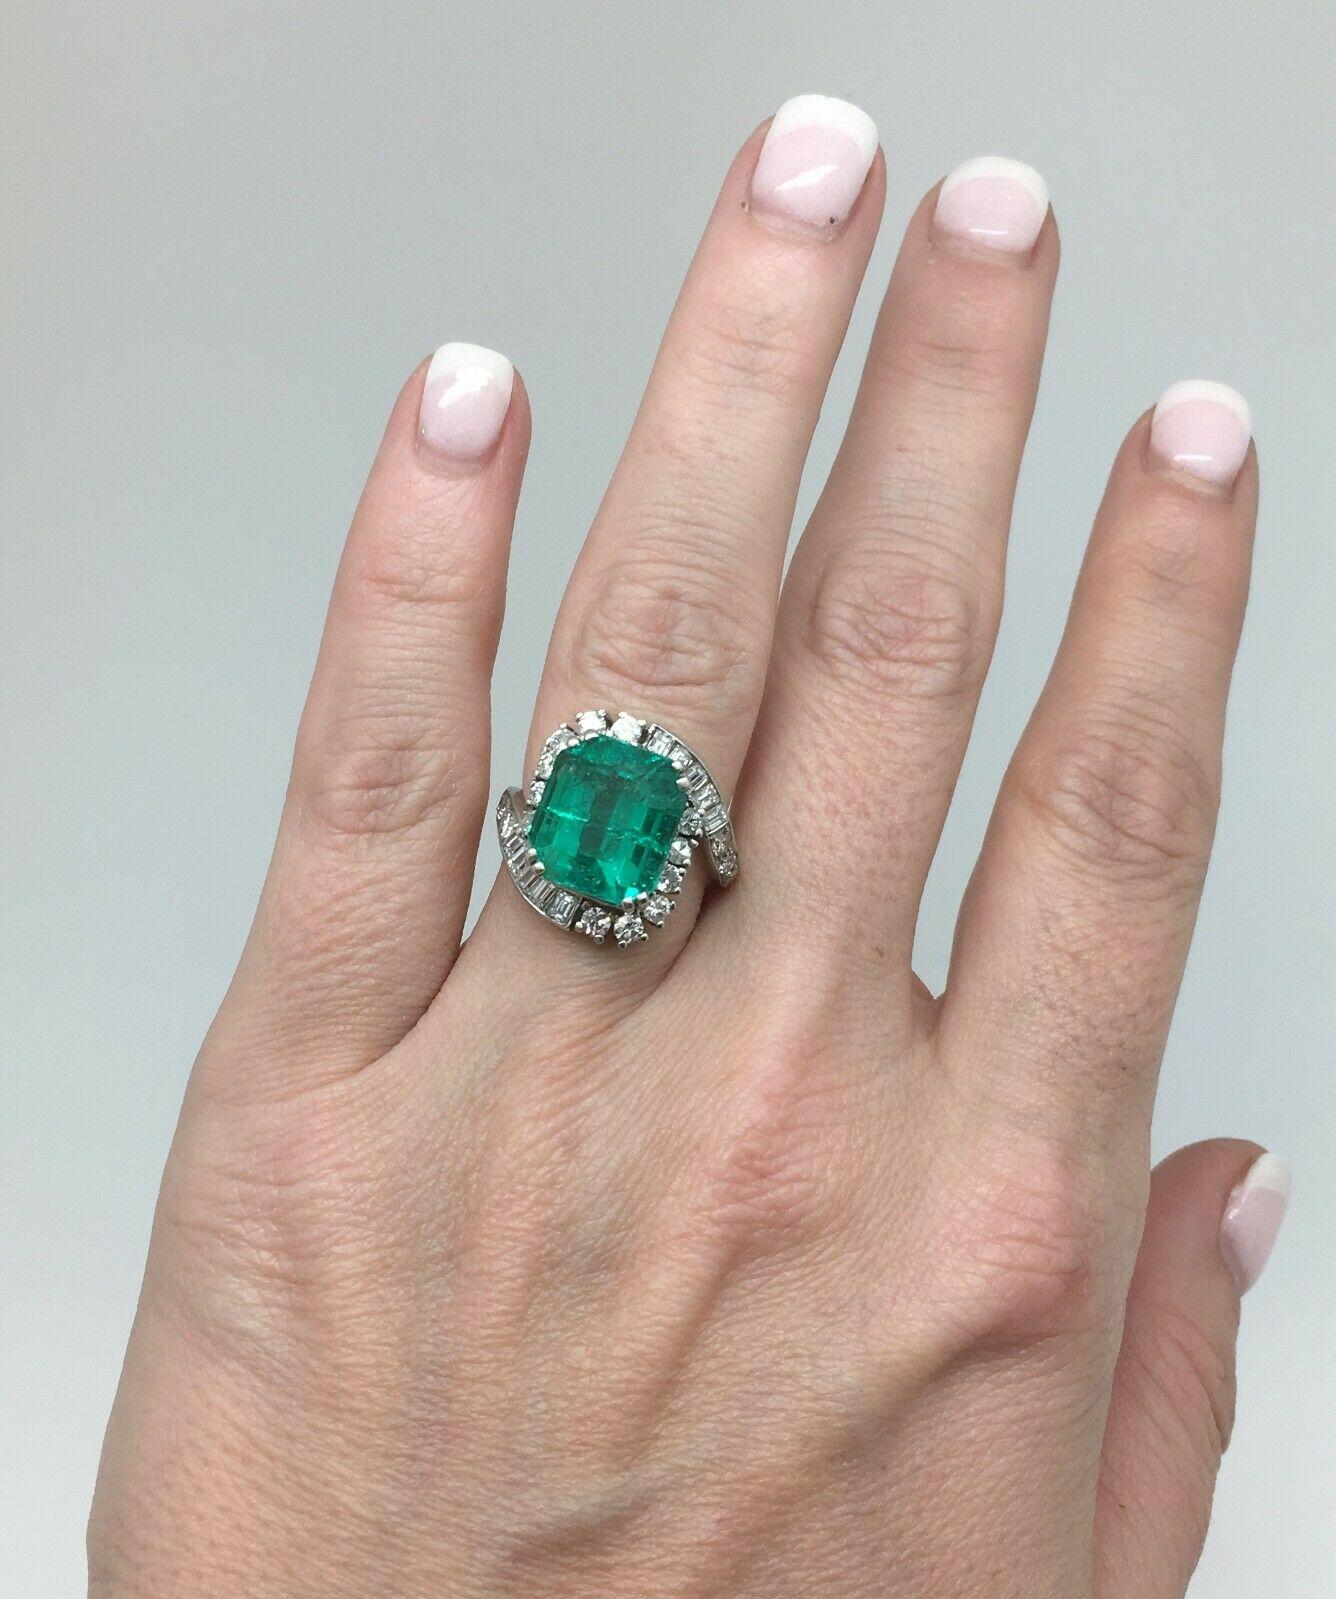 Art Deco Platinum 10.20 Carat Total Weight Colombian Emerald Diamond Engagement Ring


One Natural Colombian Emerald, Measuring 18.20 x 10.50 x 7.20mm, Weighing Approximately 9.40 Carats.

The Mounting Contains 16 Round Old Single Cut Diamonds And